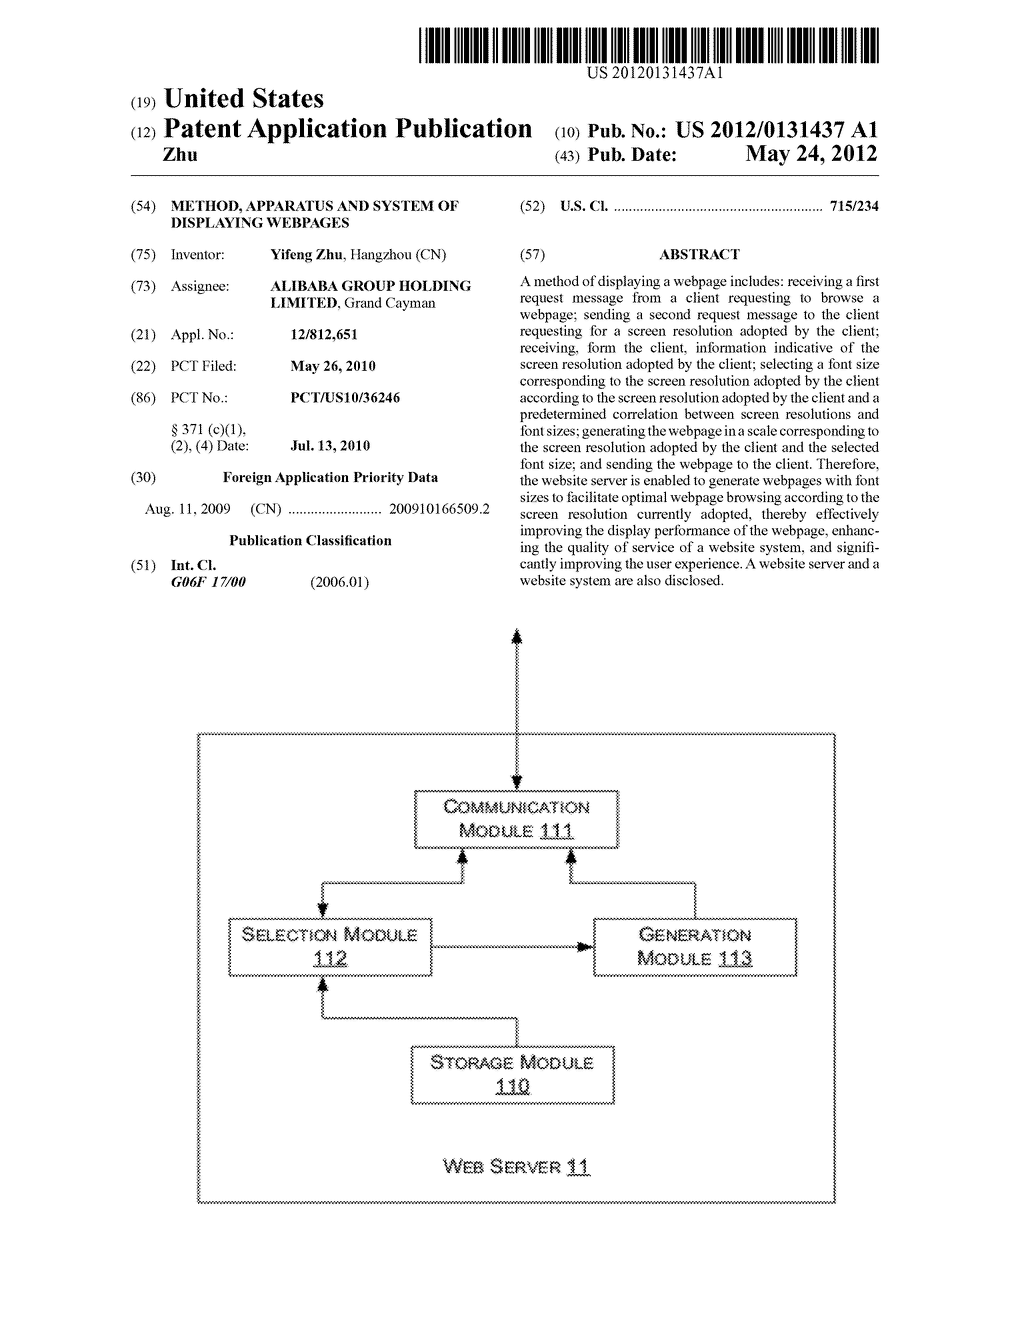 Method, Apparatus and System of Displaying Webpages - diagram, schematic, and image 01